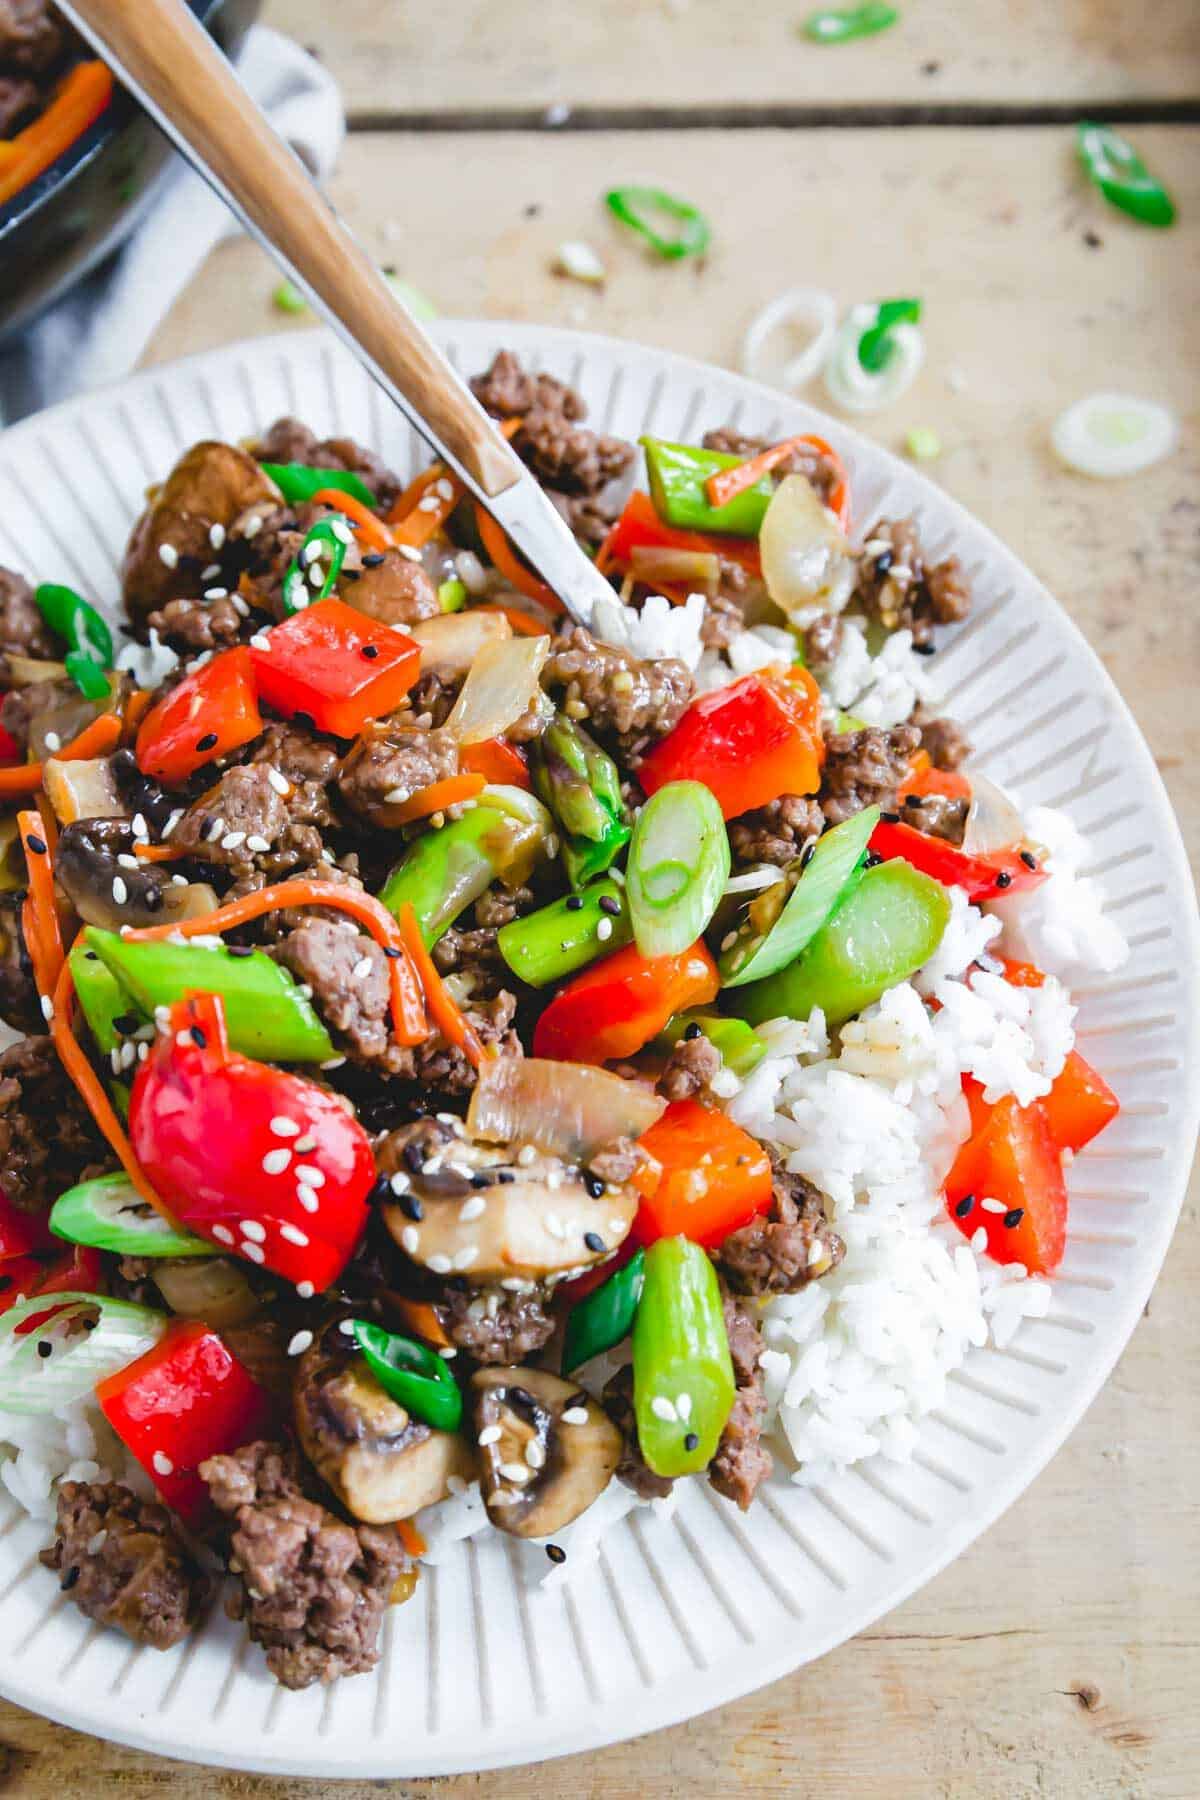 Asian inspired ground beef stir fry recipe served with white rice.